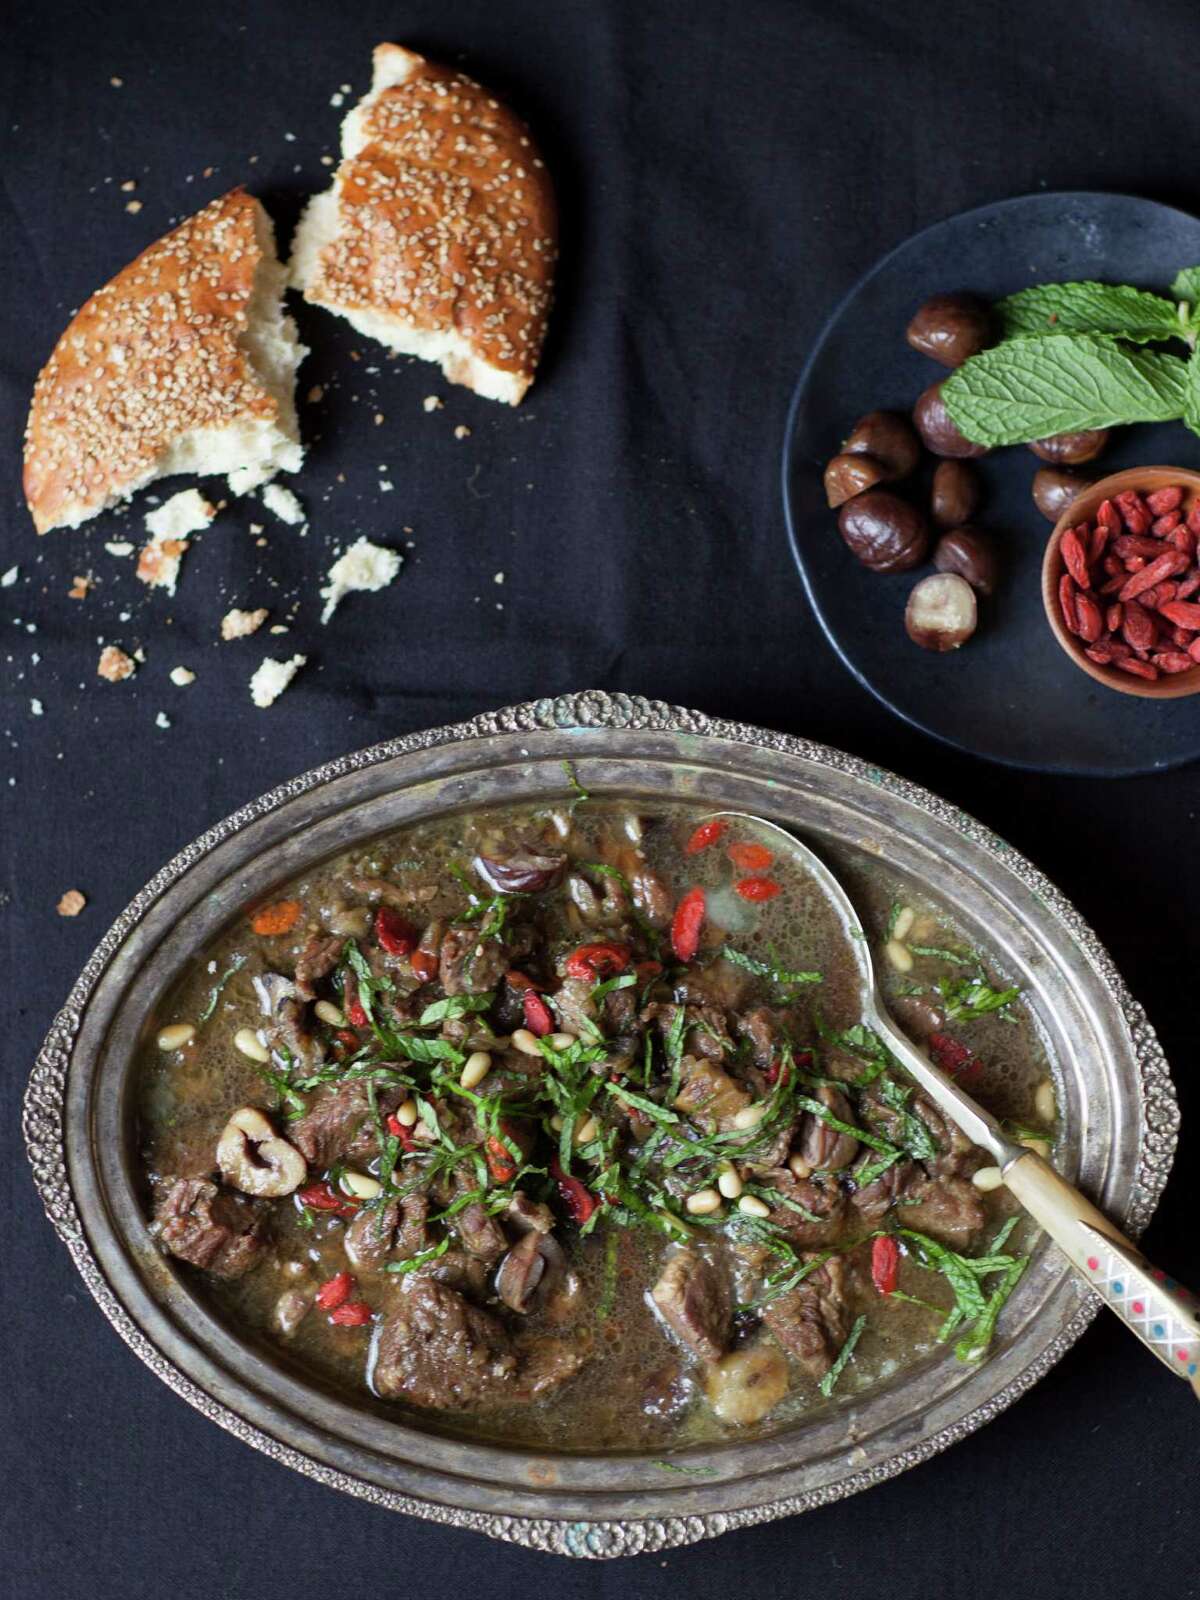 Lamb stew. Reprinted with permission from "Bone Deep Broth" by Taylor Chen and Lya Mojica, Sterling Epicure, an imprint of Sterling Publishing Co., Inc. Photo by Chad Davis Bone Deep Broth